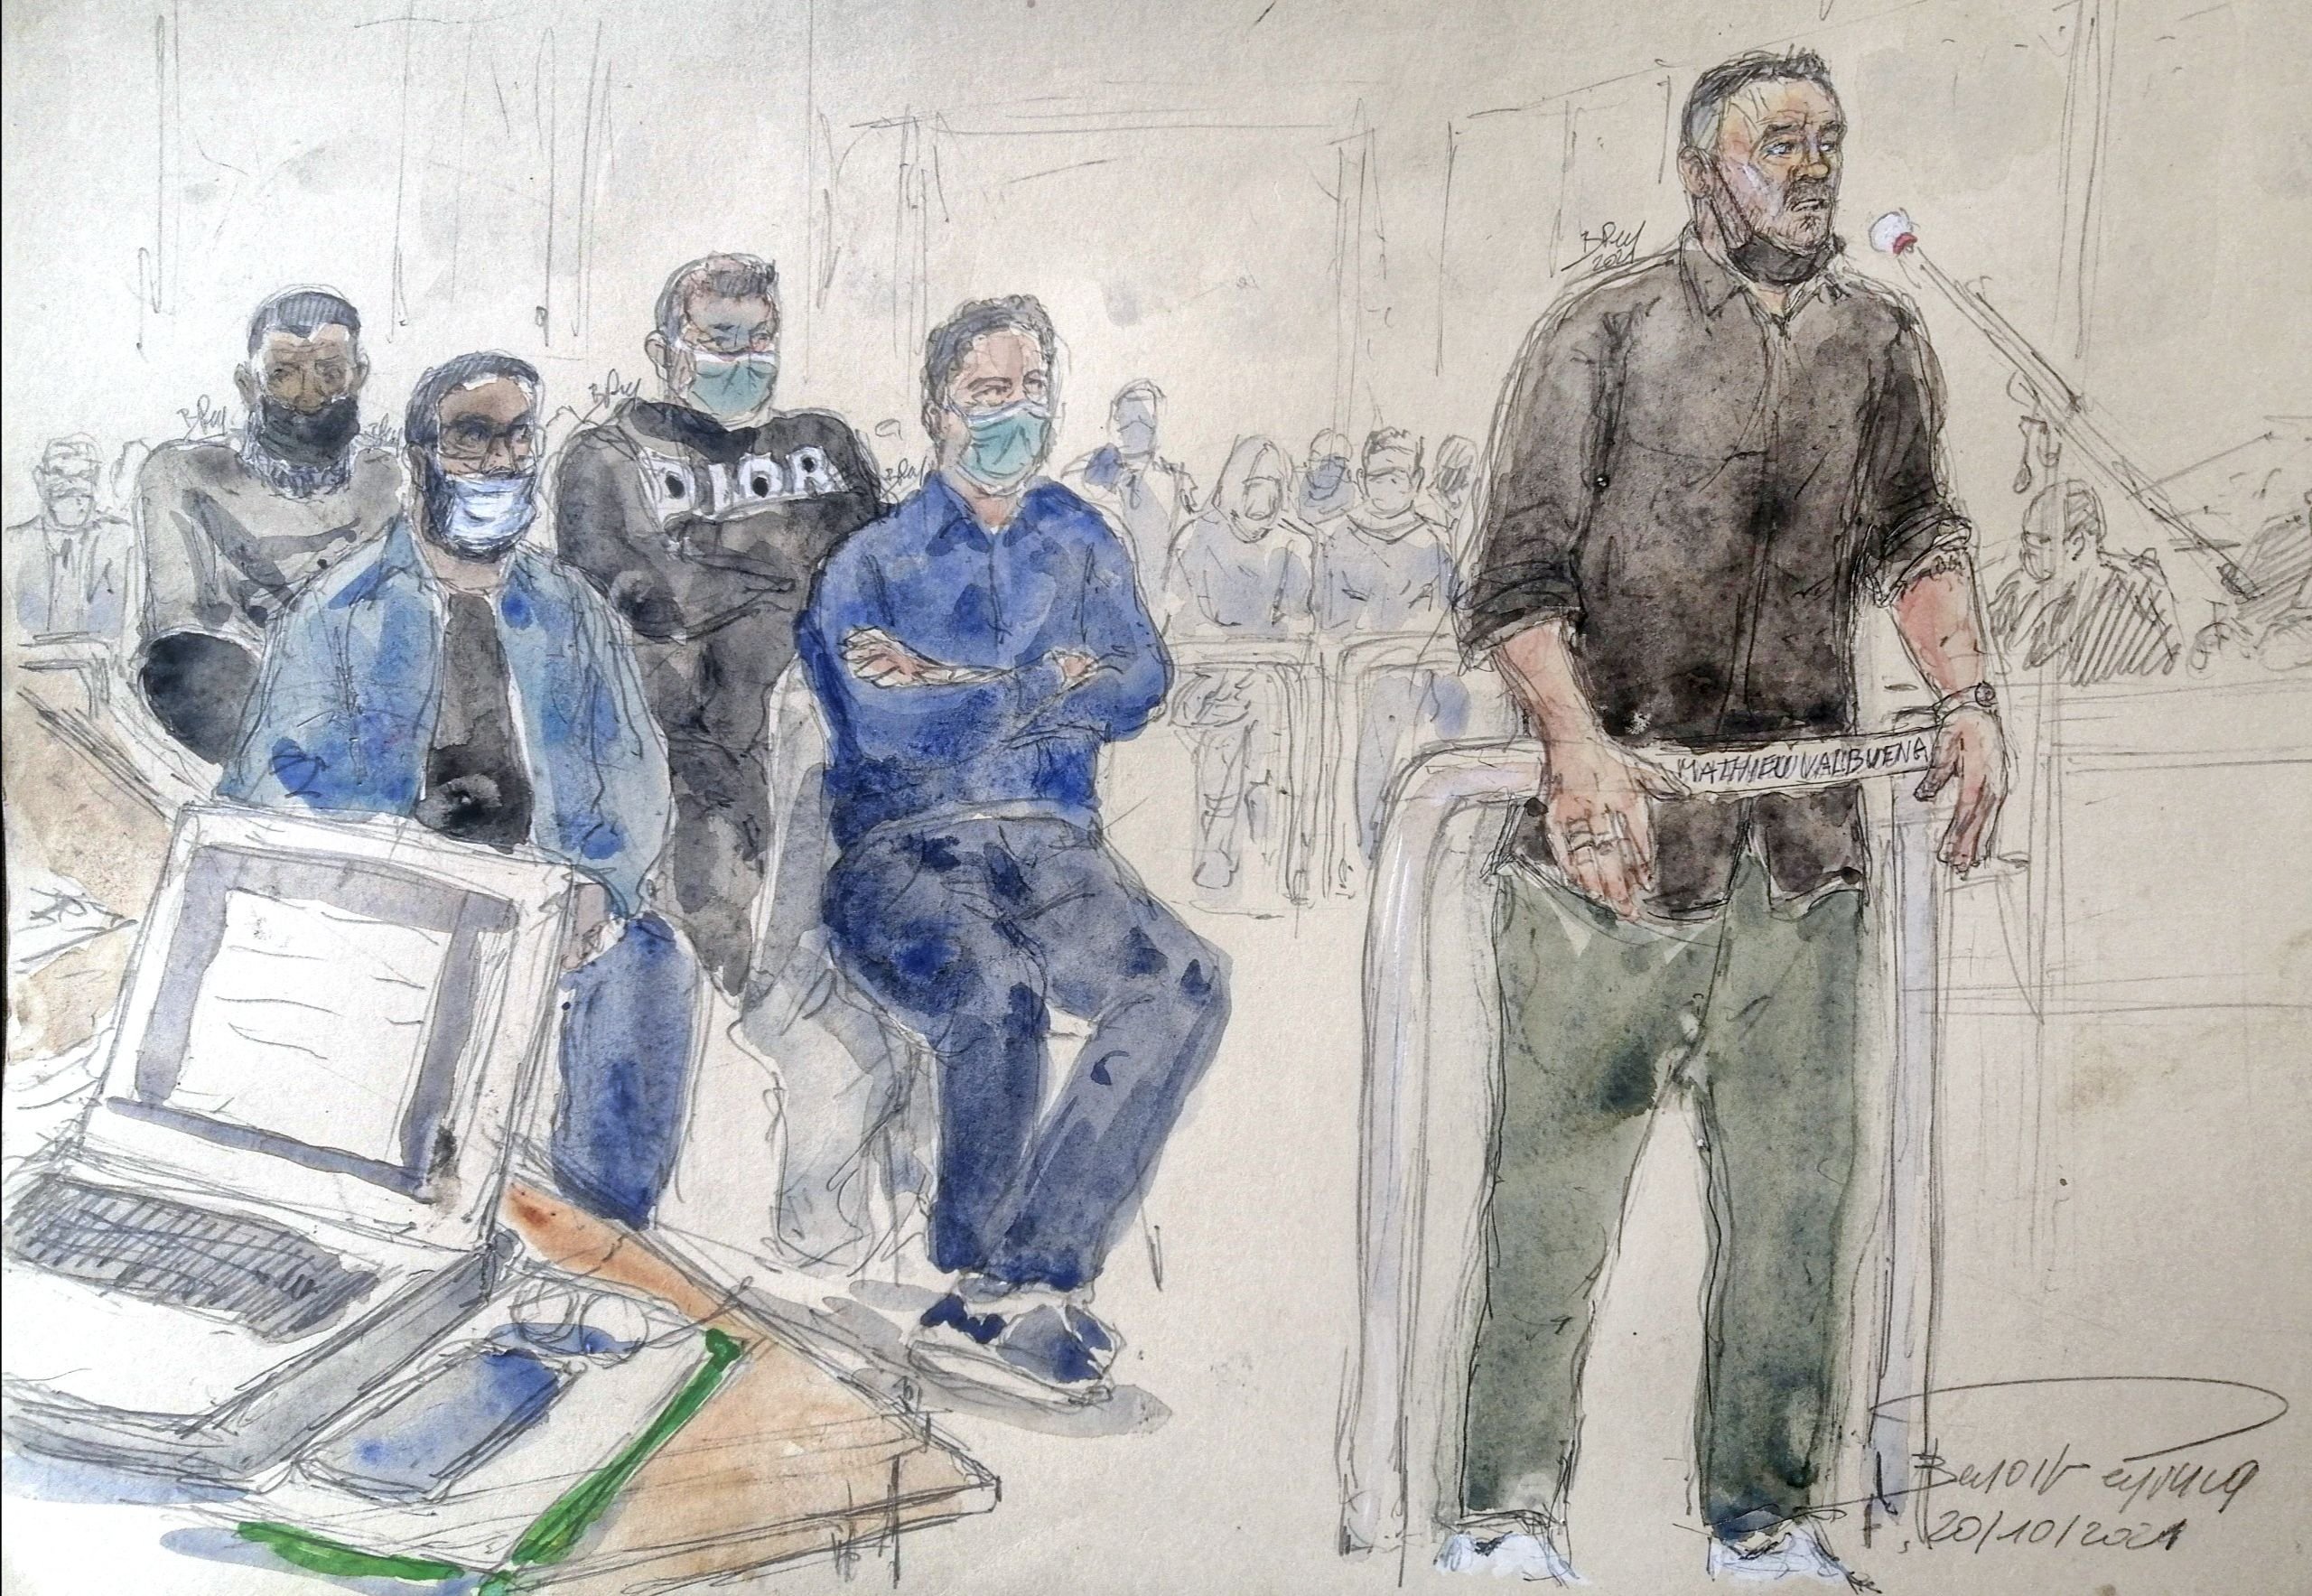 This court-sketch made on Oct. 20, 2021, shows French football player Mathieu Valbuena before the court in Versailles during the trial of his former international teammate Karim Benzema and four other accused on charges of complicity in an attempted blackmail in a case known as the 'sex tape affair.' (AFP Photo)